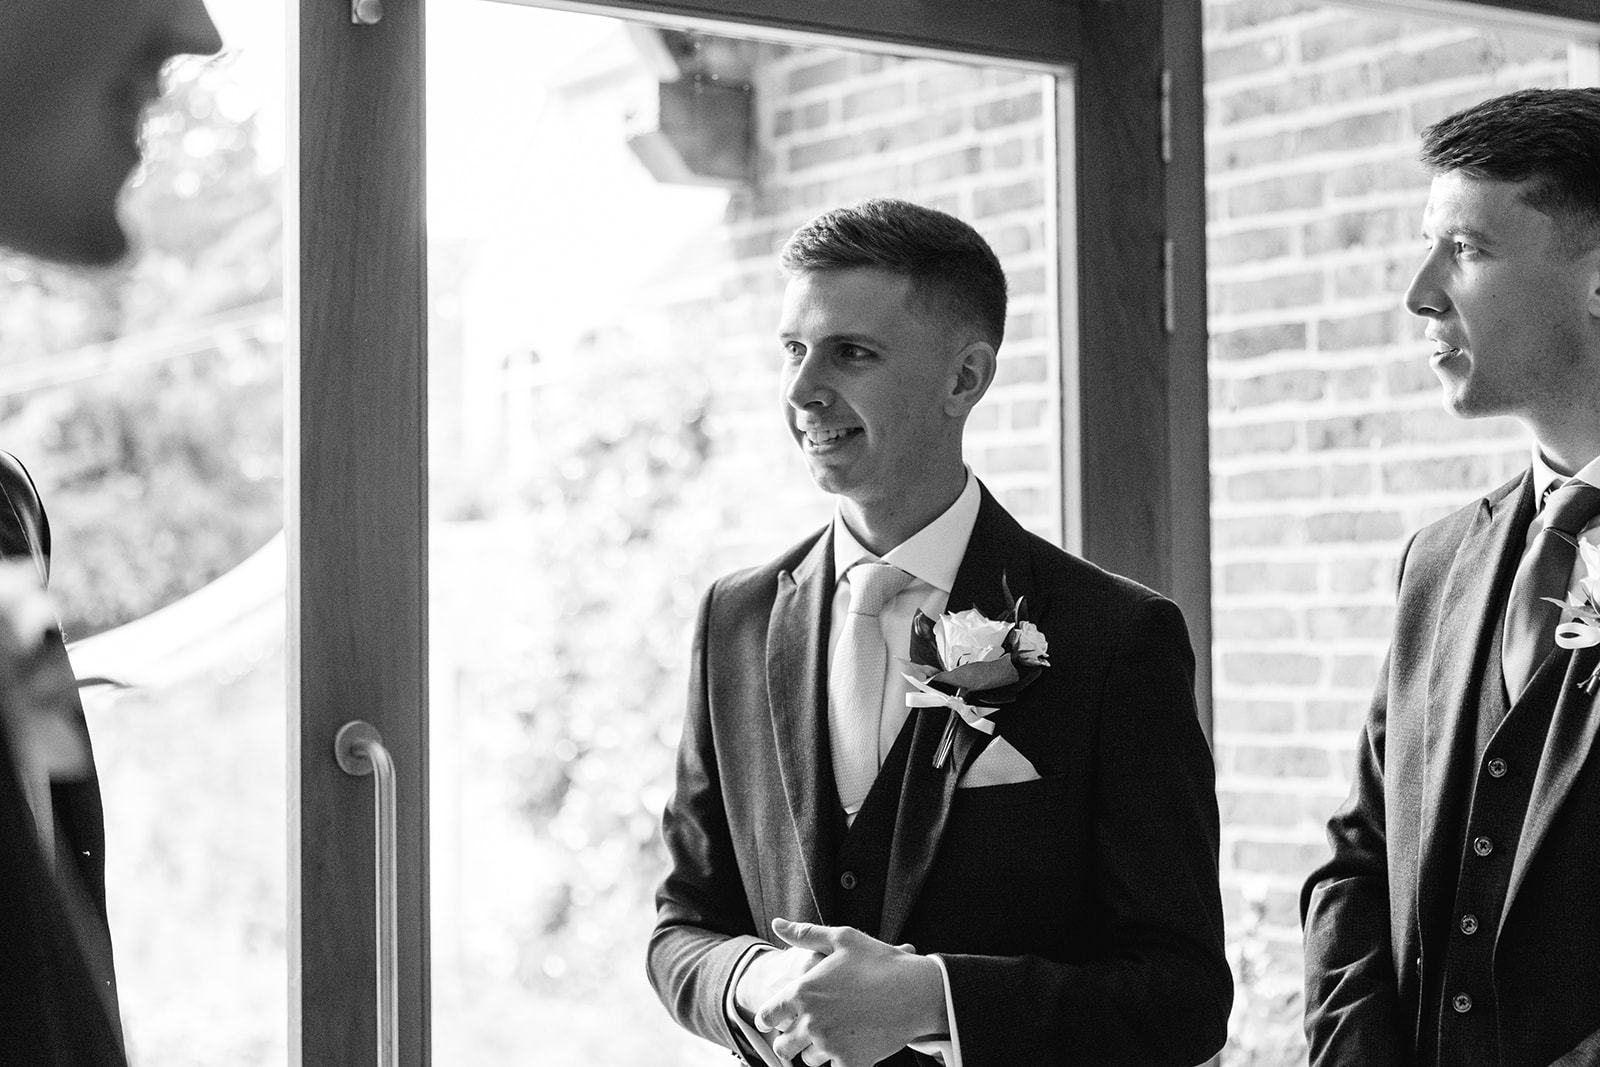 Groom awaiting bride at a Bury Manor Barn Wedding in Sussex. Photographer OliveJoy Photography.